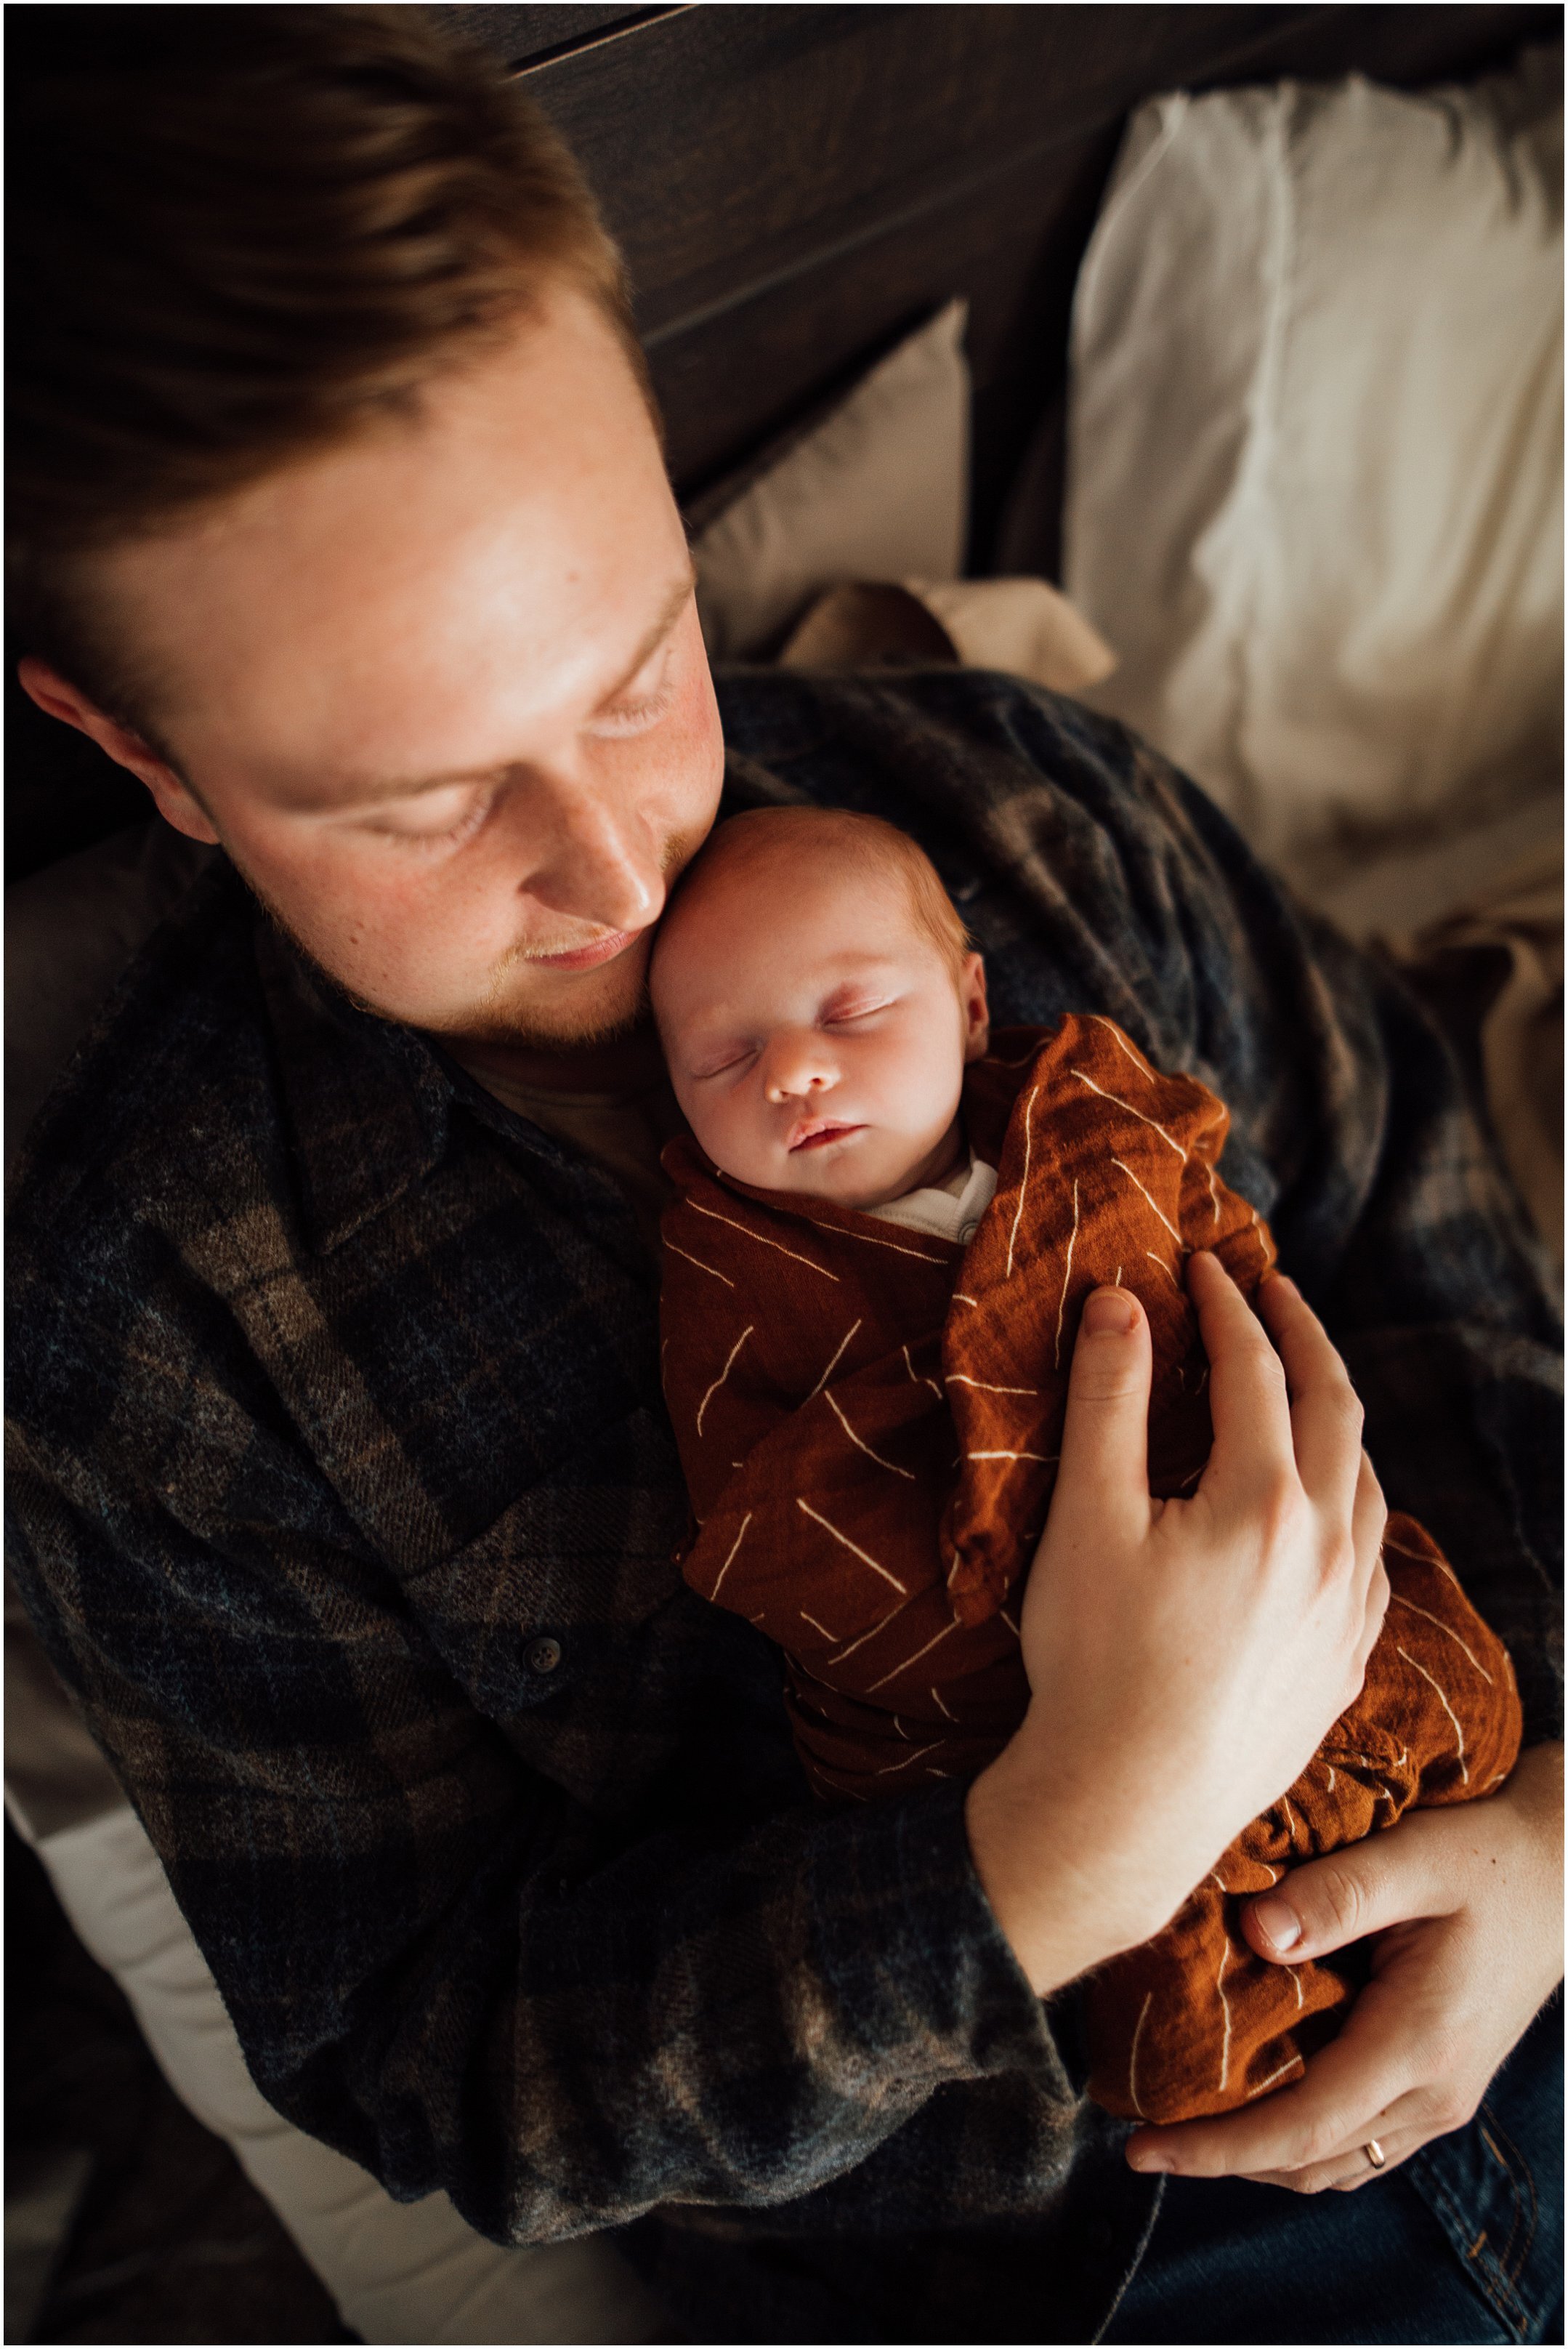 Kelly Lovan Photography | southern indiana newborn photographer | newborn photography style | newborn photography posing ideas | newborn photo father and daughter 